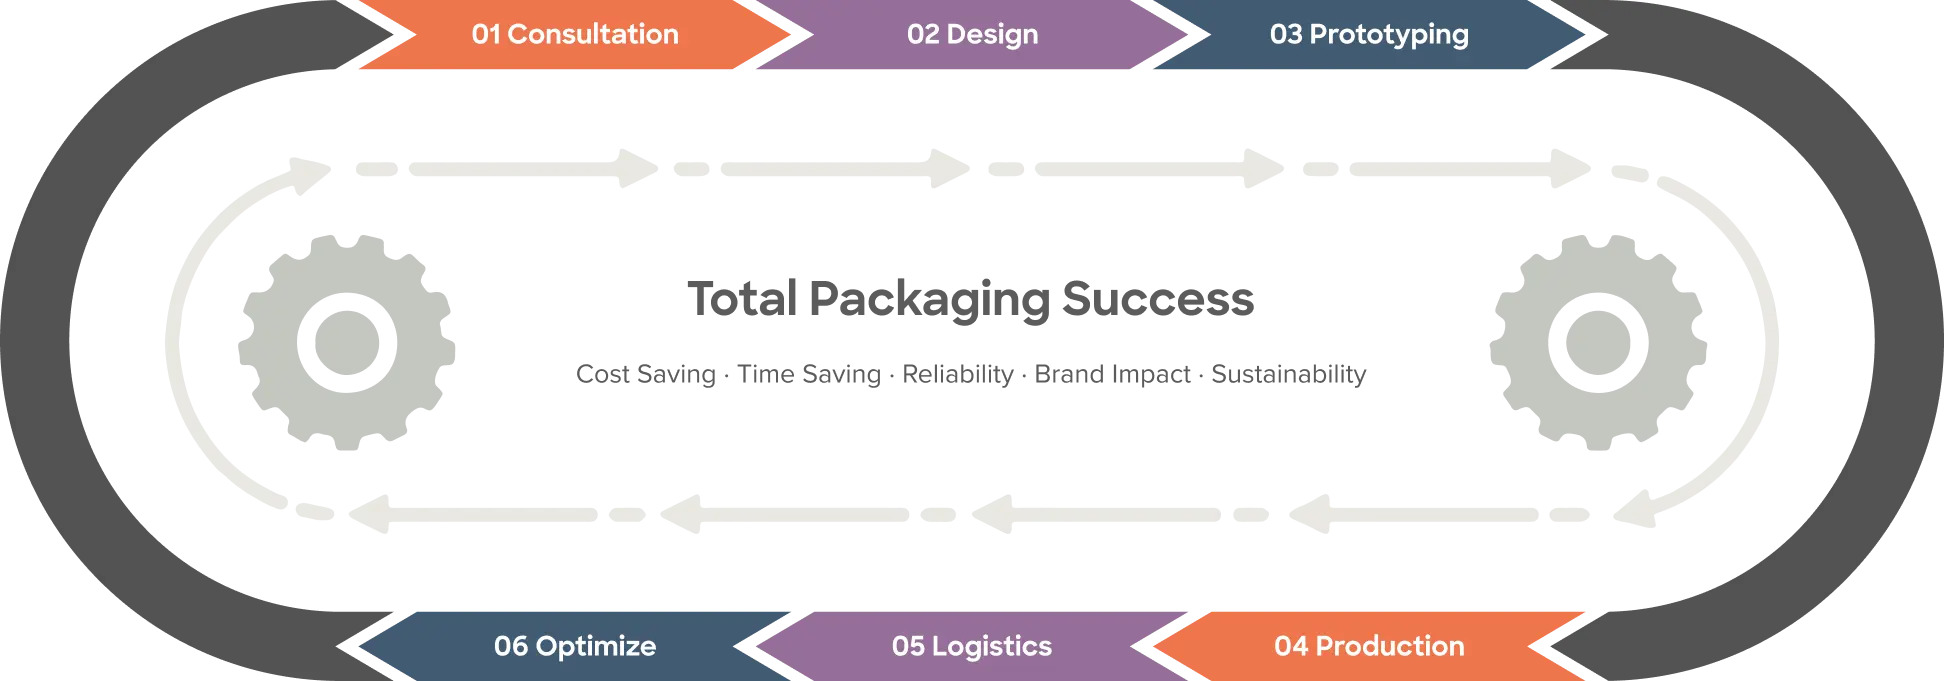  A proven process for impactful custom packaging